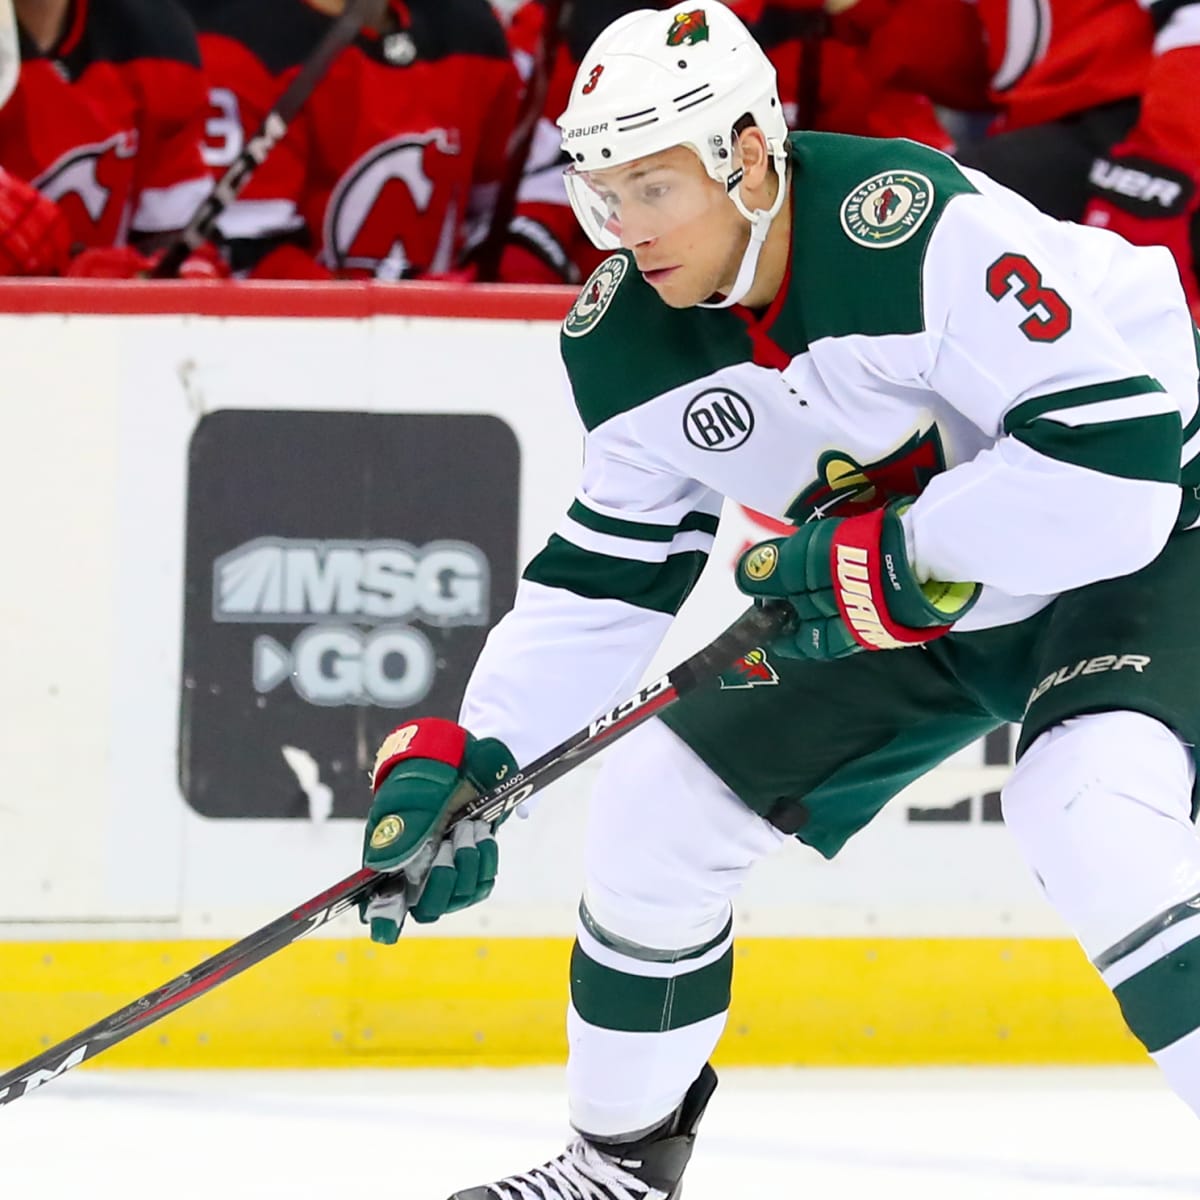 Charlie Coyle Hockey Stats and Profile at